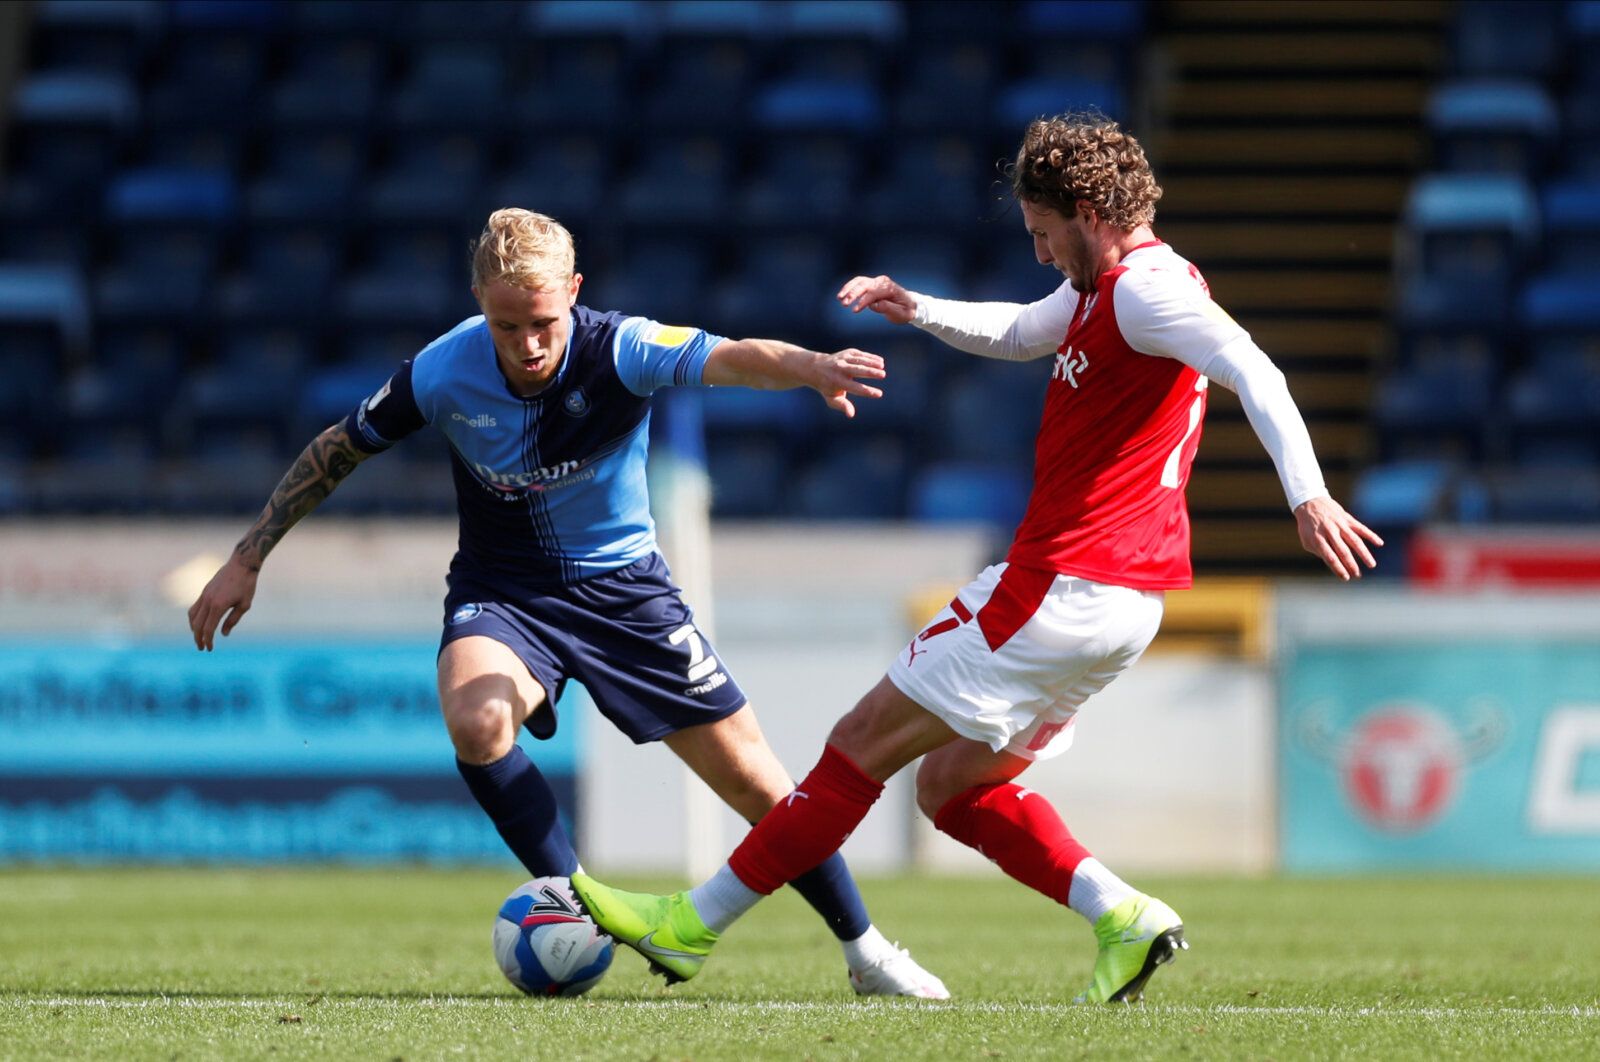 Soccer Football - Championship - Wycombe Wanderers v Rotherham United - Adams Park, High Wycombe, Britain - September 12, 2020   Wycombe Wanderers’ Jack Grimmer in action with Rotherham United’s Kieran Sadlier   Action Images/Matthew Childs    EDITORIAL USE ONLY. No use with unauthorized audio, video, data, fixture lists, club/league logos or 